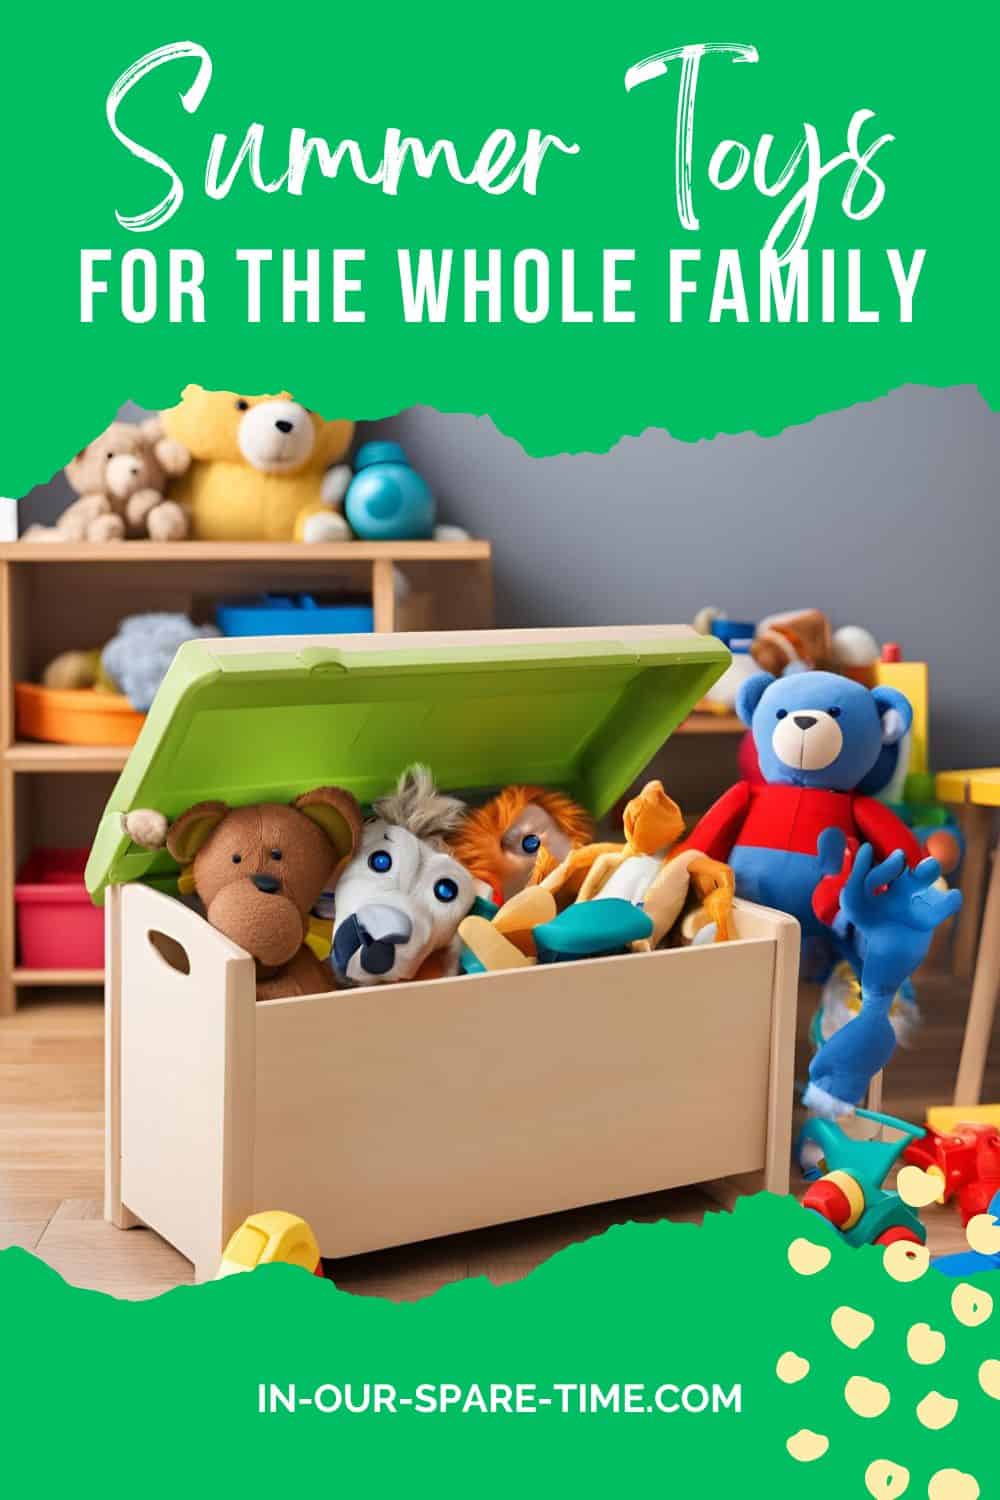 Let your family explore their creativity and experience the joy of play in the great outdoors. With the right summer toys, playtime can be fun and educational for everyone.